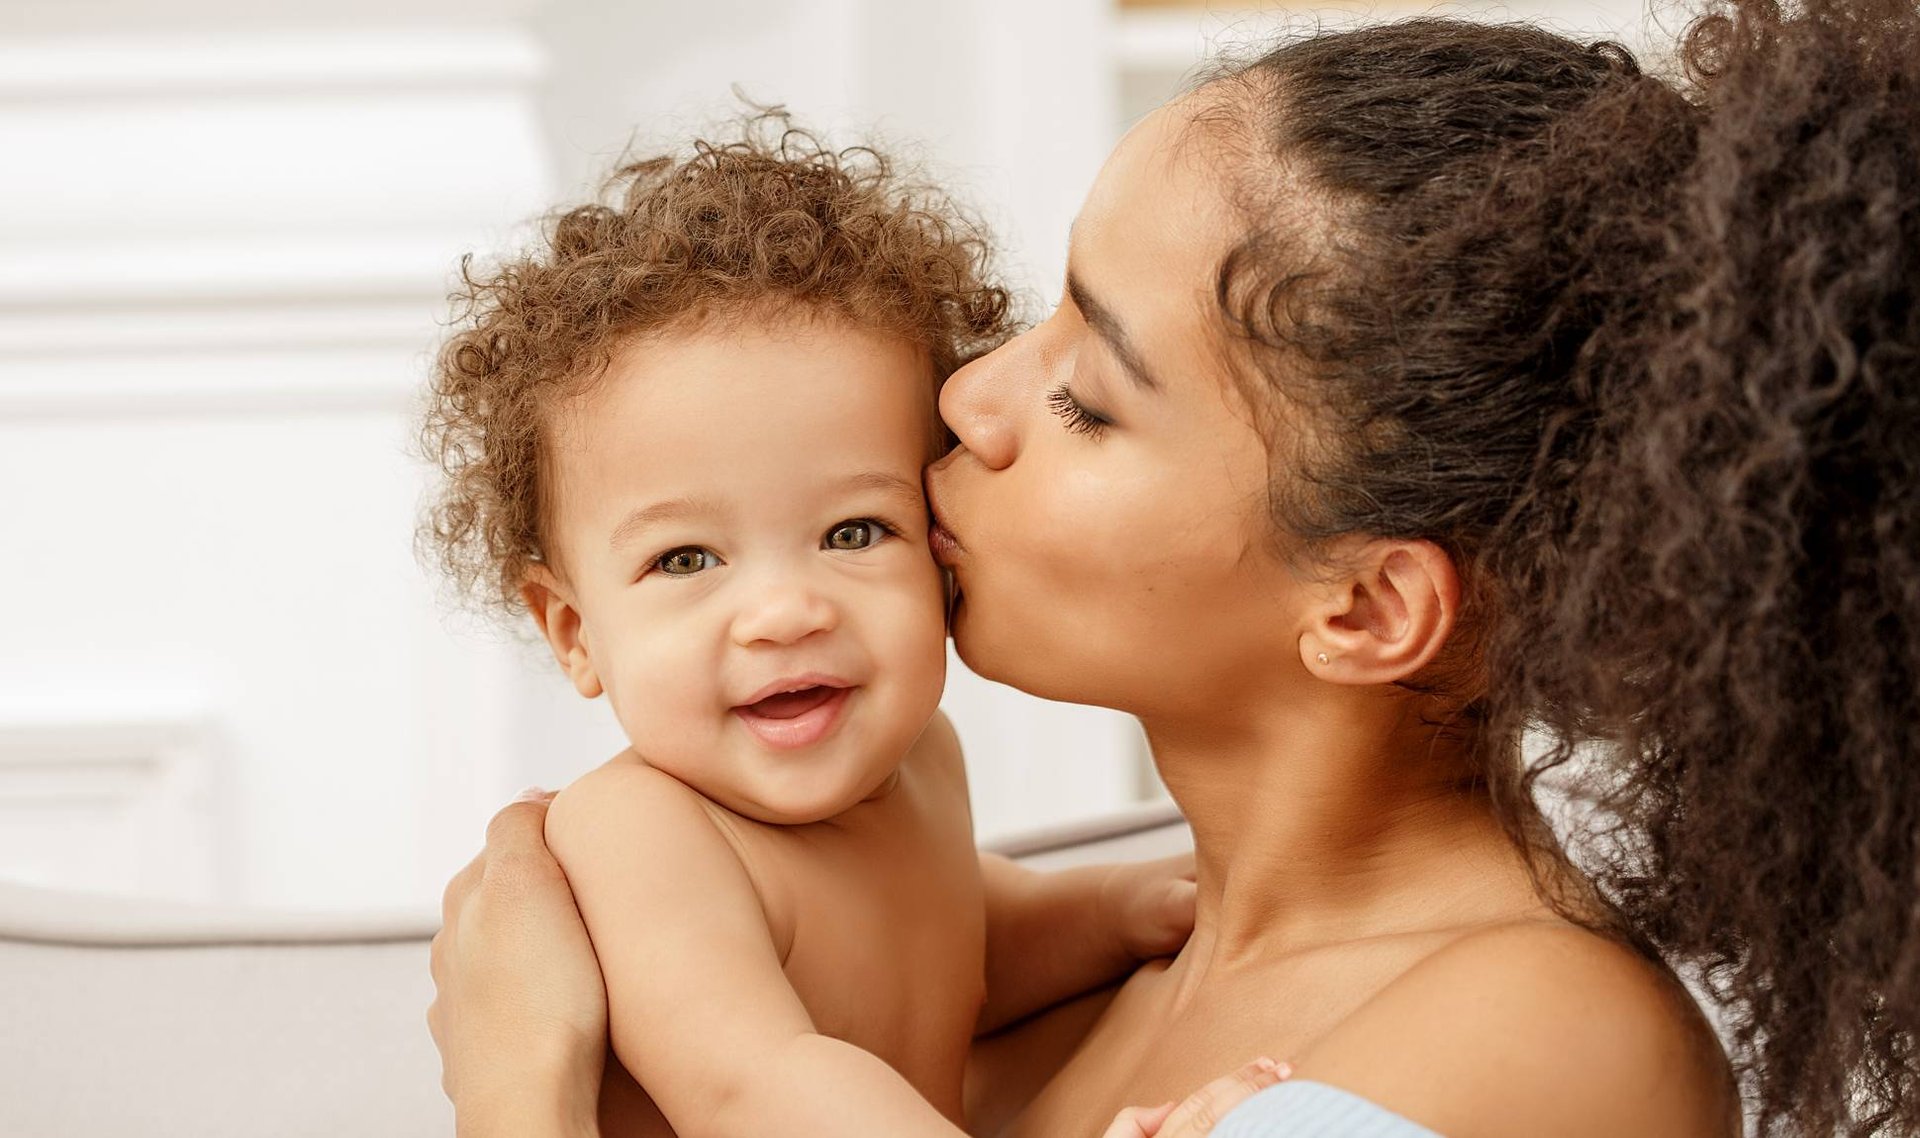 A Dermatologist Shares Postpartum Skin-Care Tips All New Moms Need To Hear